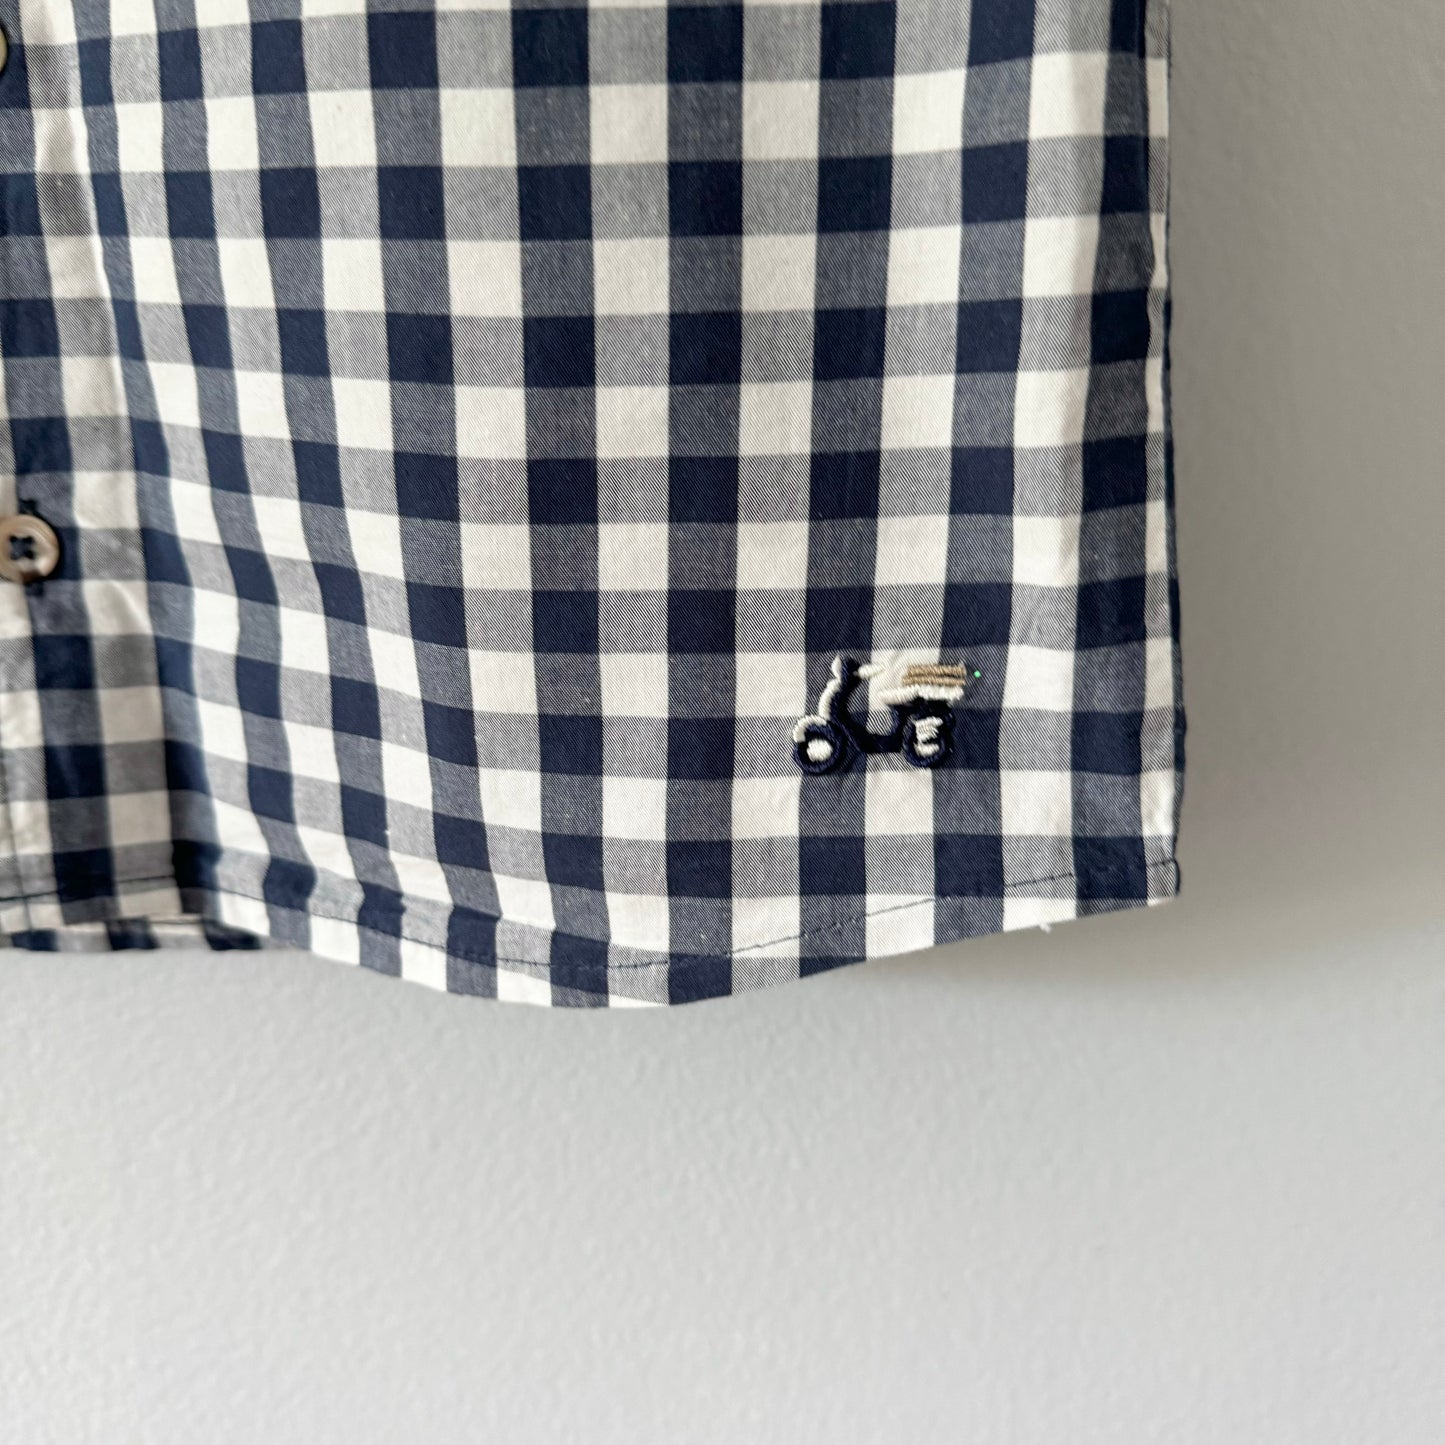 Miles the label / White x navy gingham shirt / 7Y